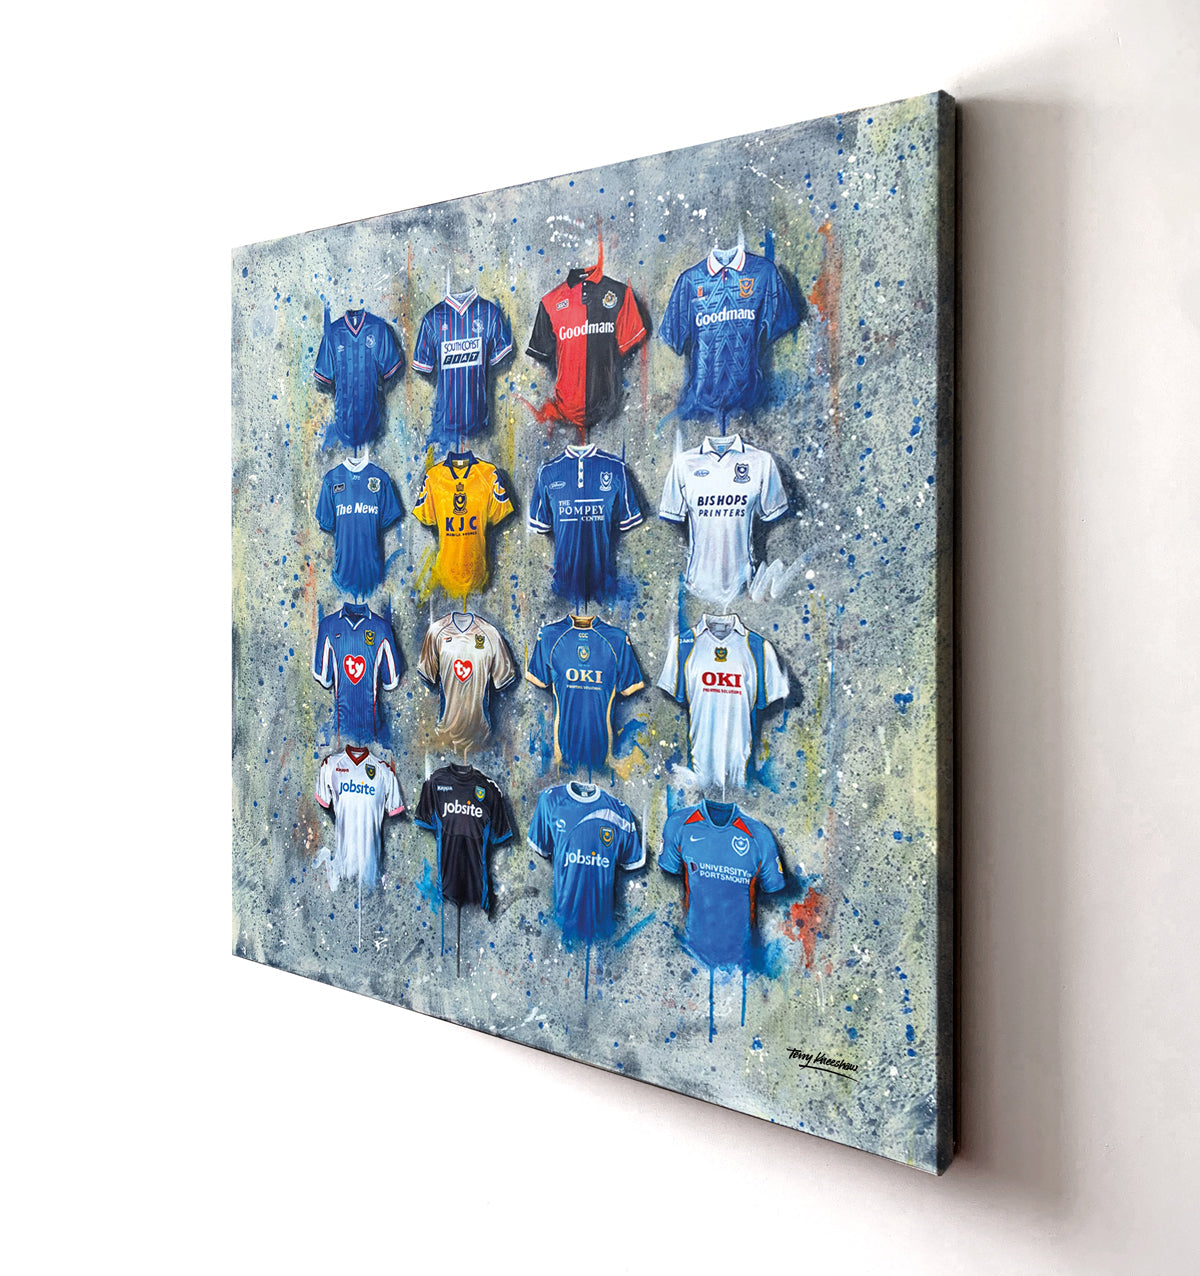 Introducing the Portsmouth Canvases by Terry Kneeshaw! These stunning artworks feature various sizes and come with the choice of 20x20, 30x30, or 40x40, framed or unframed, with a black floating frame. The canvases capture the spirit of the Portsmouth team, making them a must-have for any Pompey fan. These visually striking canvases are perfect for displaying in any home or office and are a great way to show support for the team.